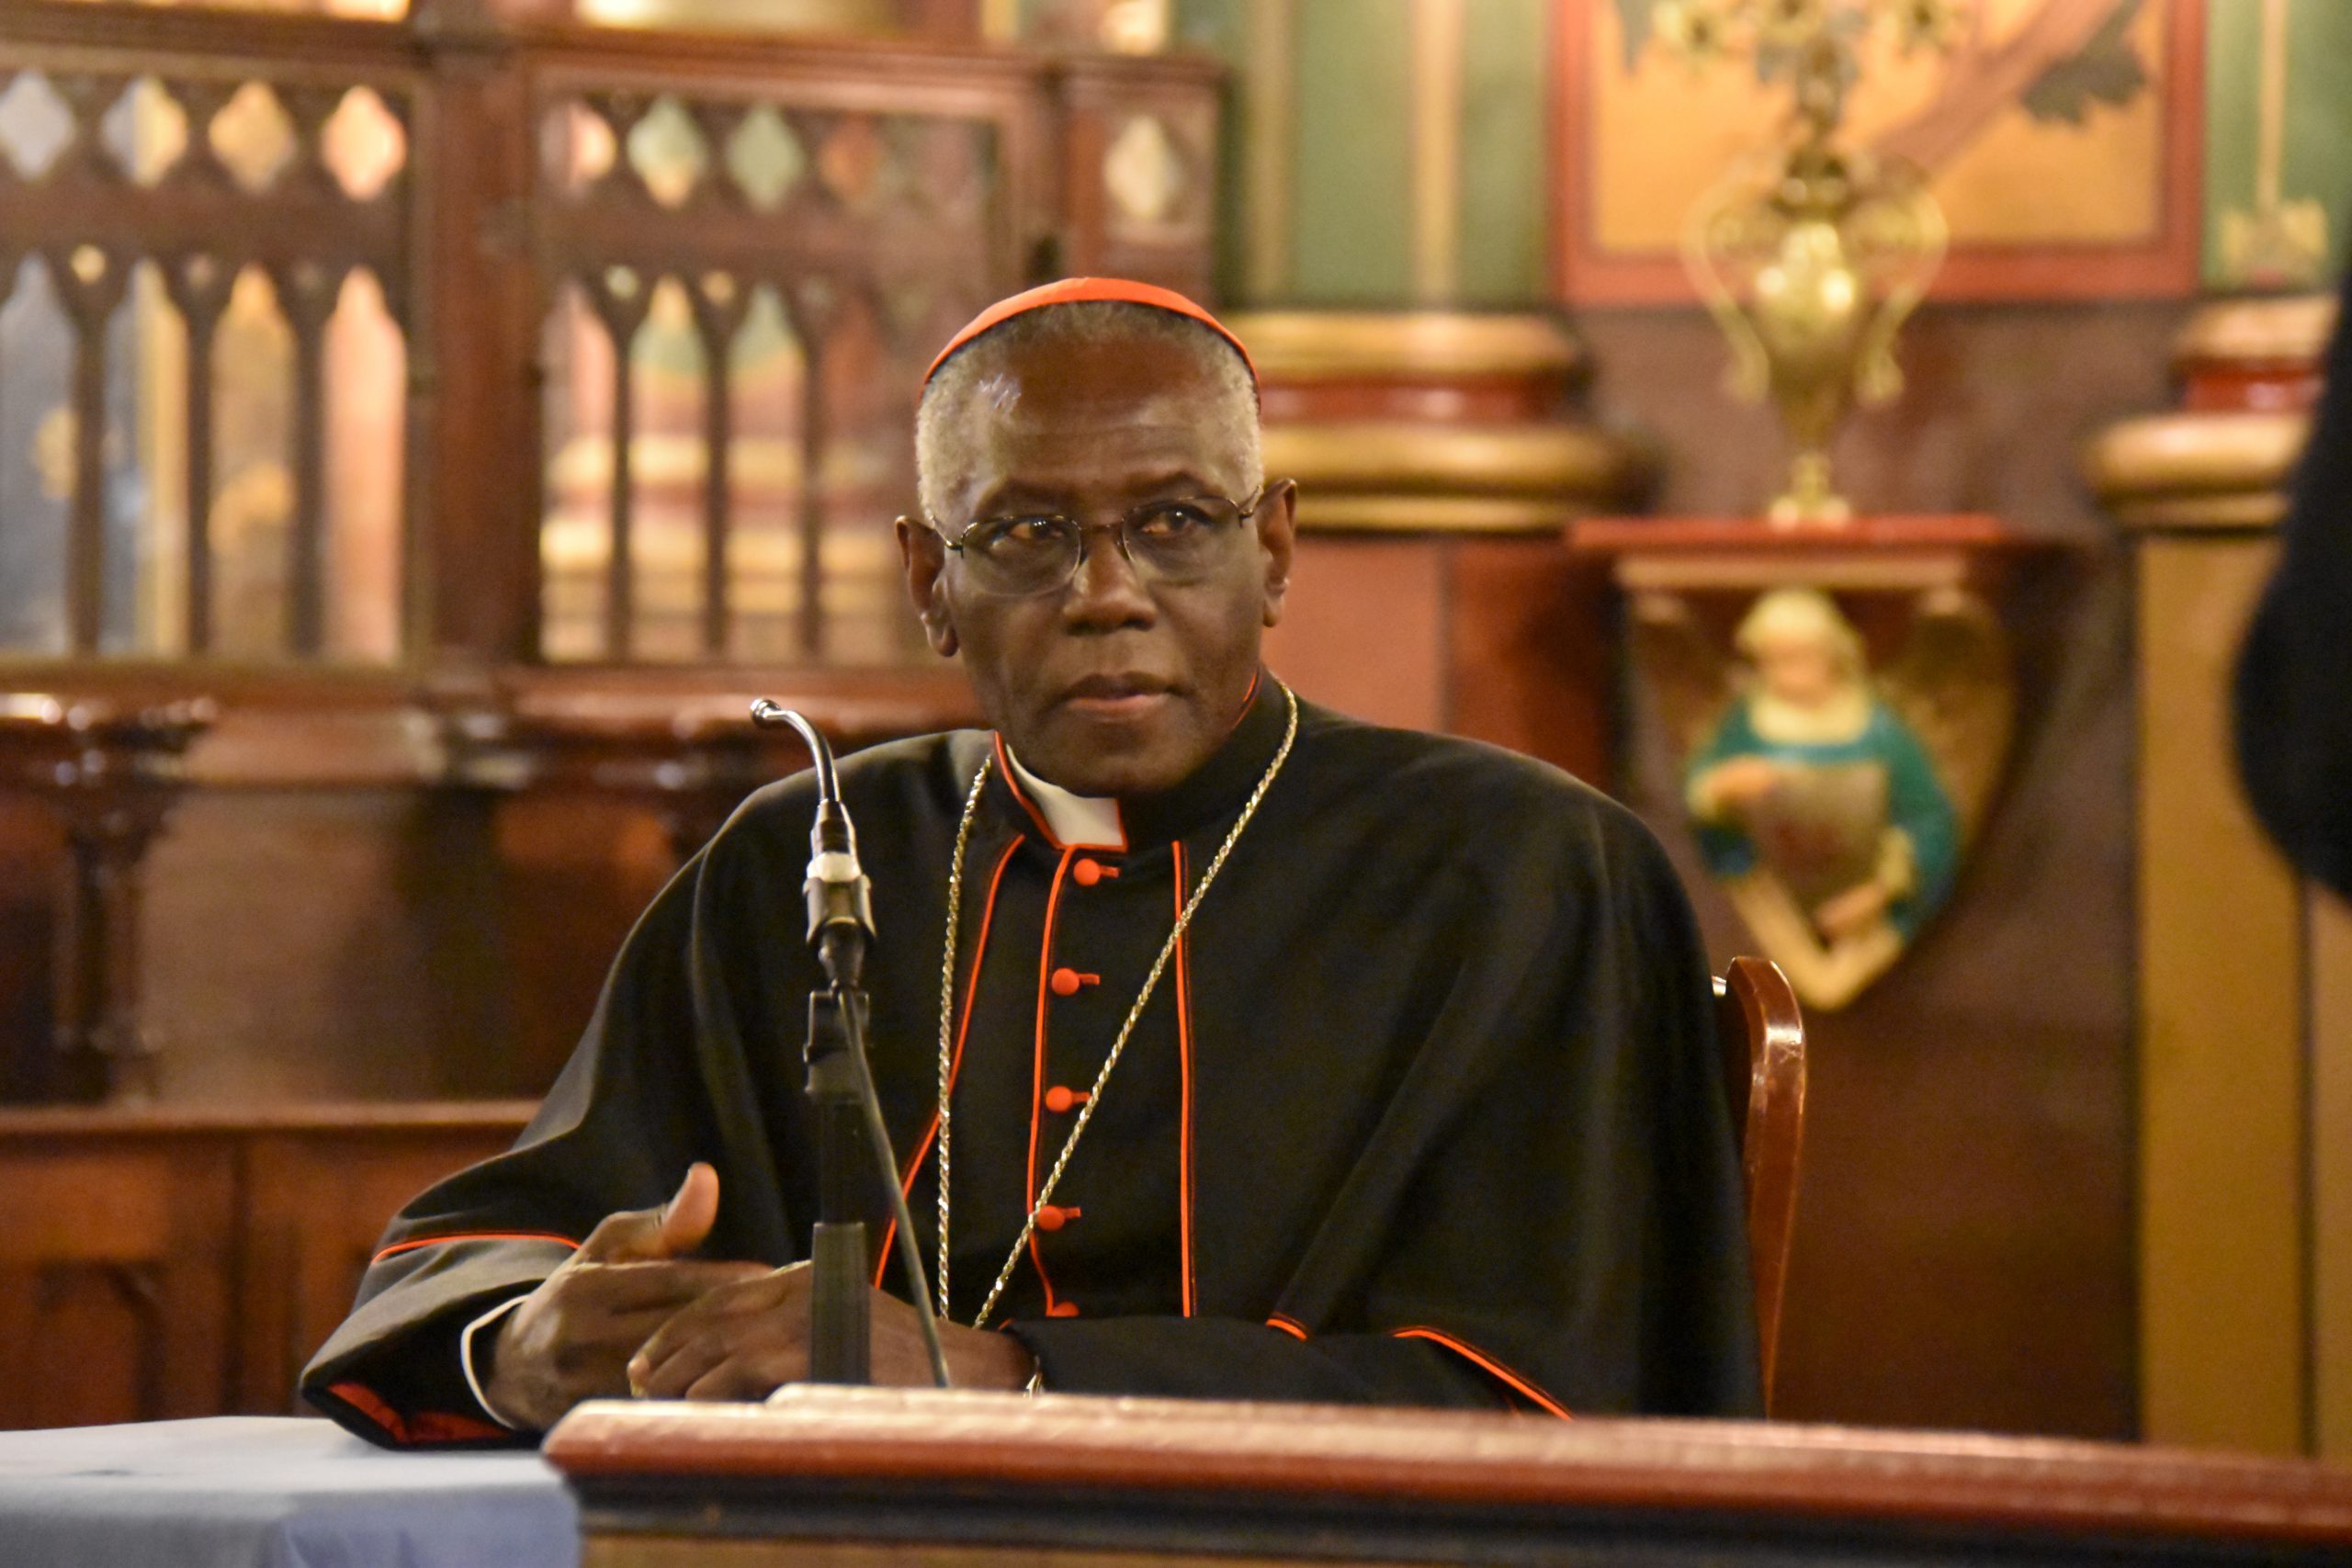 Cardinal Robert Sarah, Prefect of the Congregation for Divine Worship and the Discipline of the Sacraments, is “profoundly convinced that our bodies must participate in this conversion to God. The best way is certainly to celebrate—priests and faithful—turned together in the same direction: Toward the Lord who comes.”